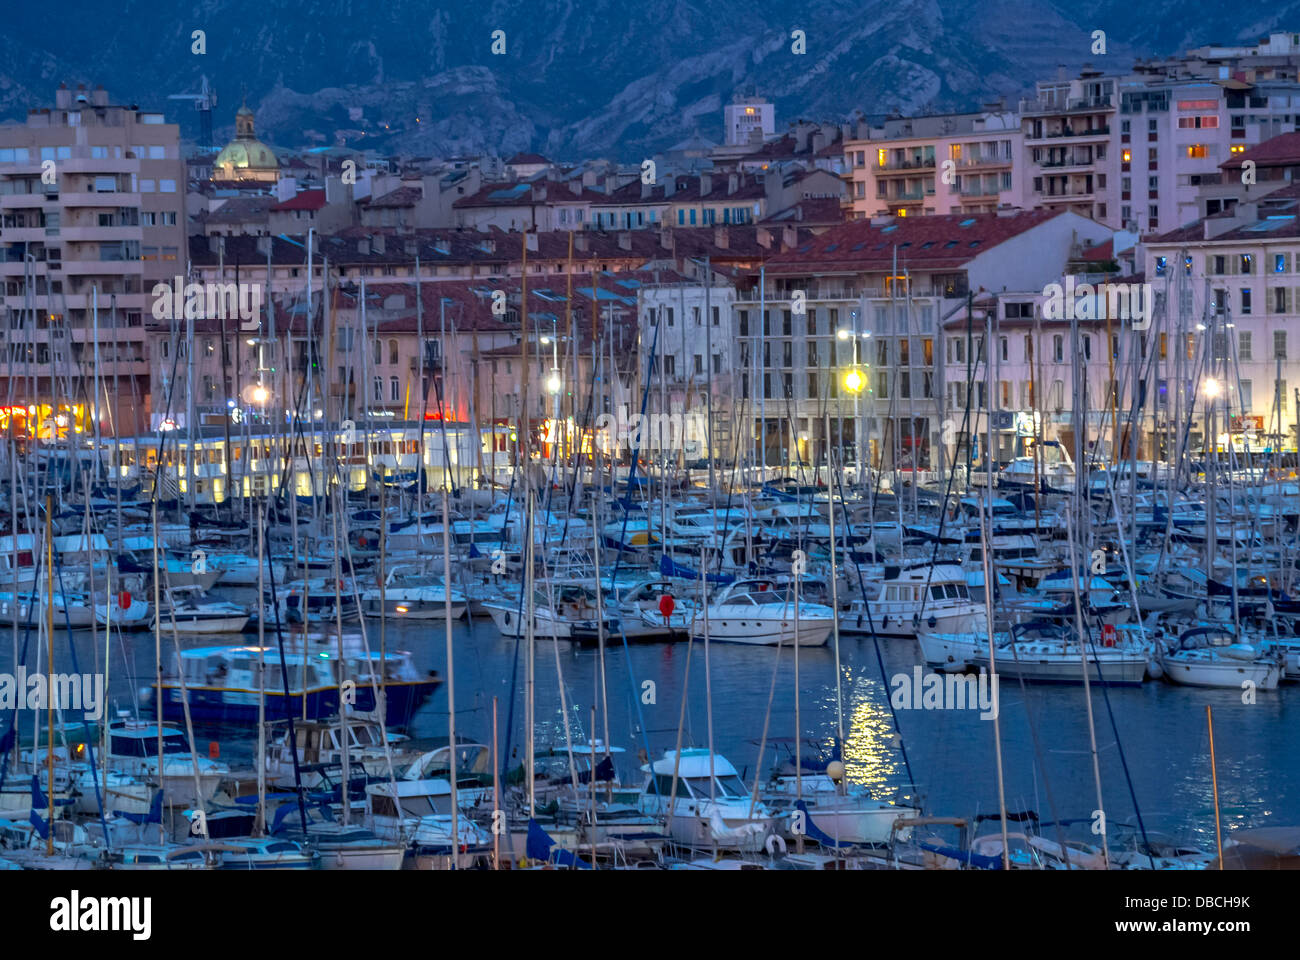 Marseille, France, Romantic Cityscapes of Vieux Port area, at Dusk, Old Port, Scenics, South of France Stock Photo